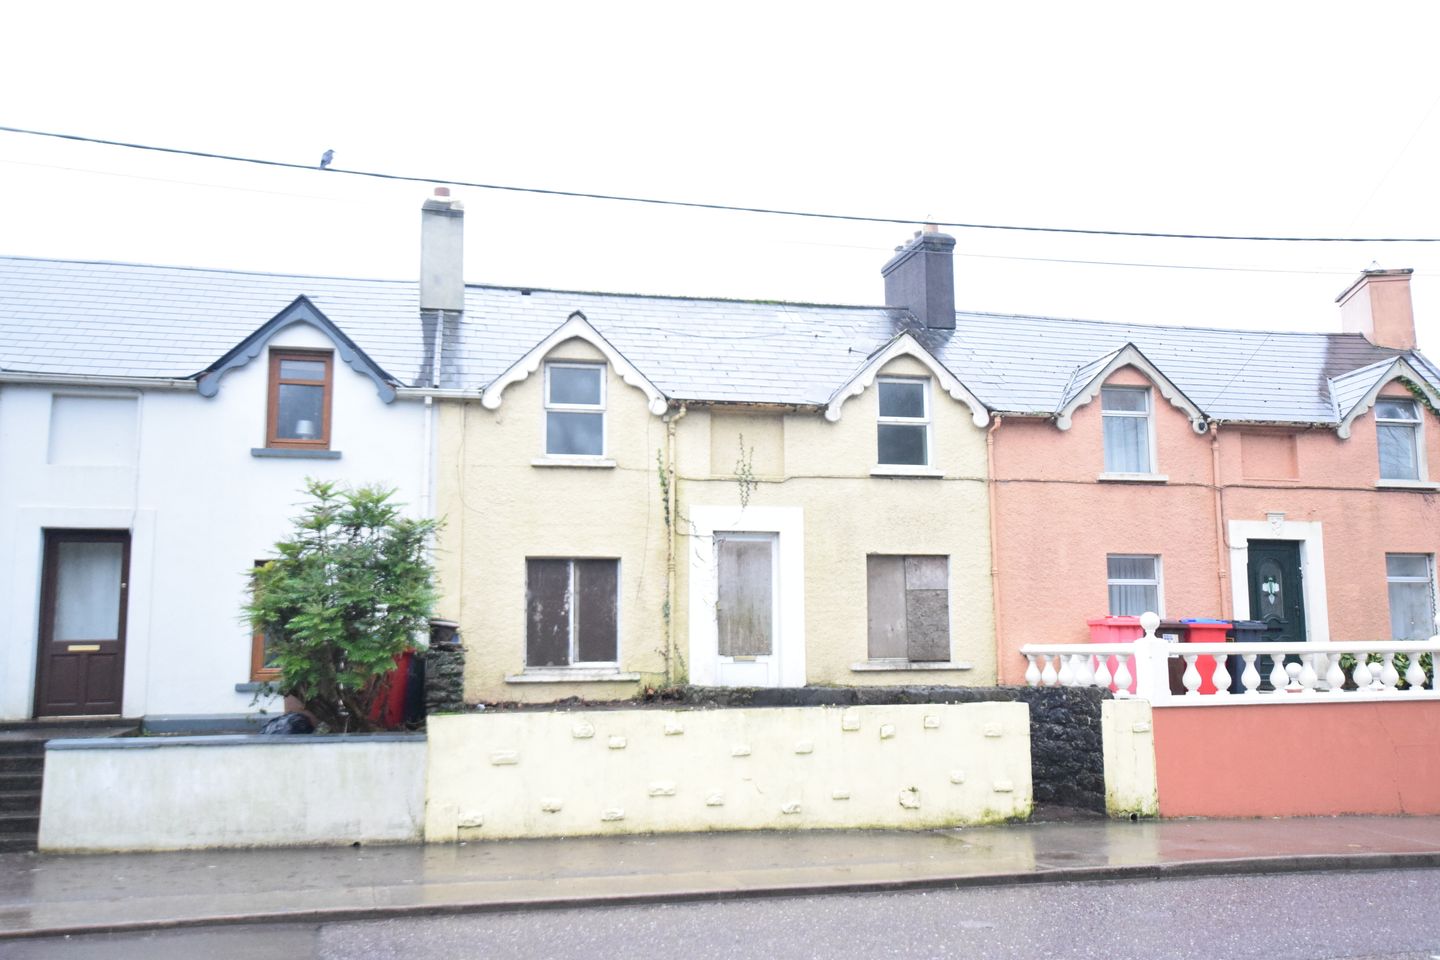 2 Old Dispensary, Youghal Road, Midleton, Co. Cork, P25EY91